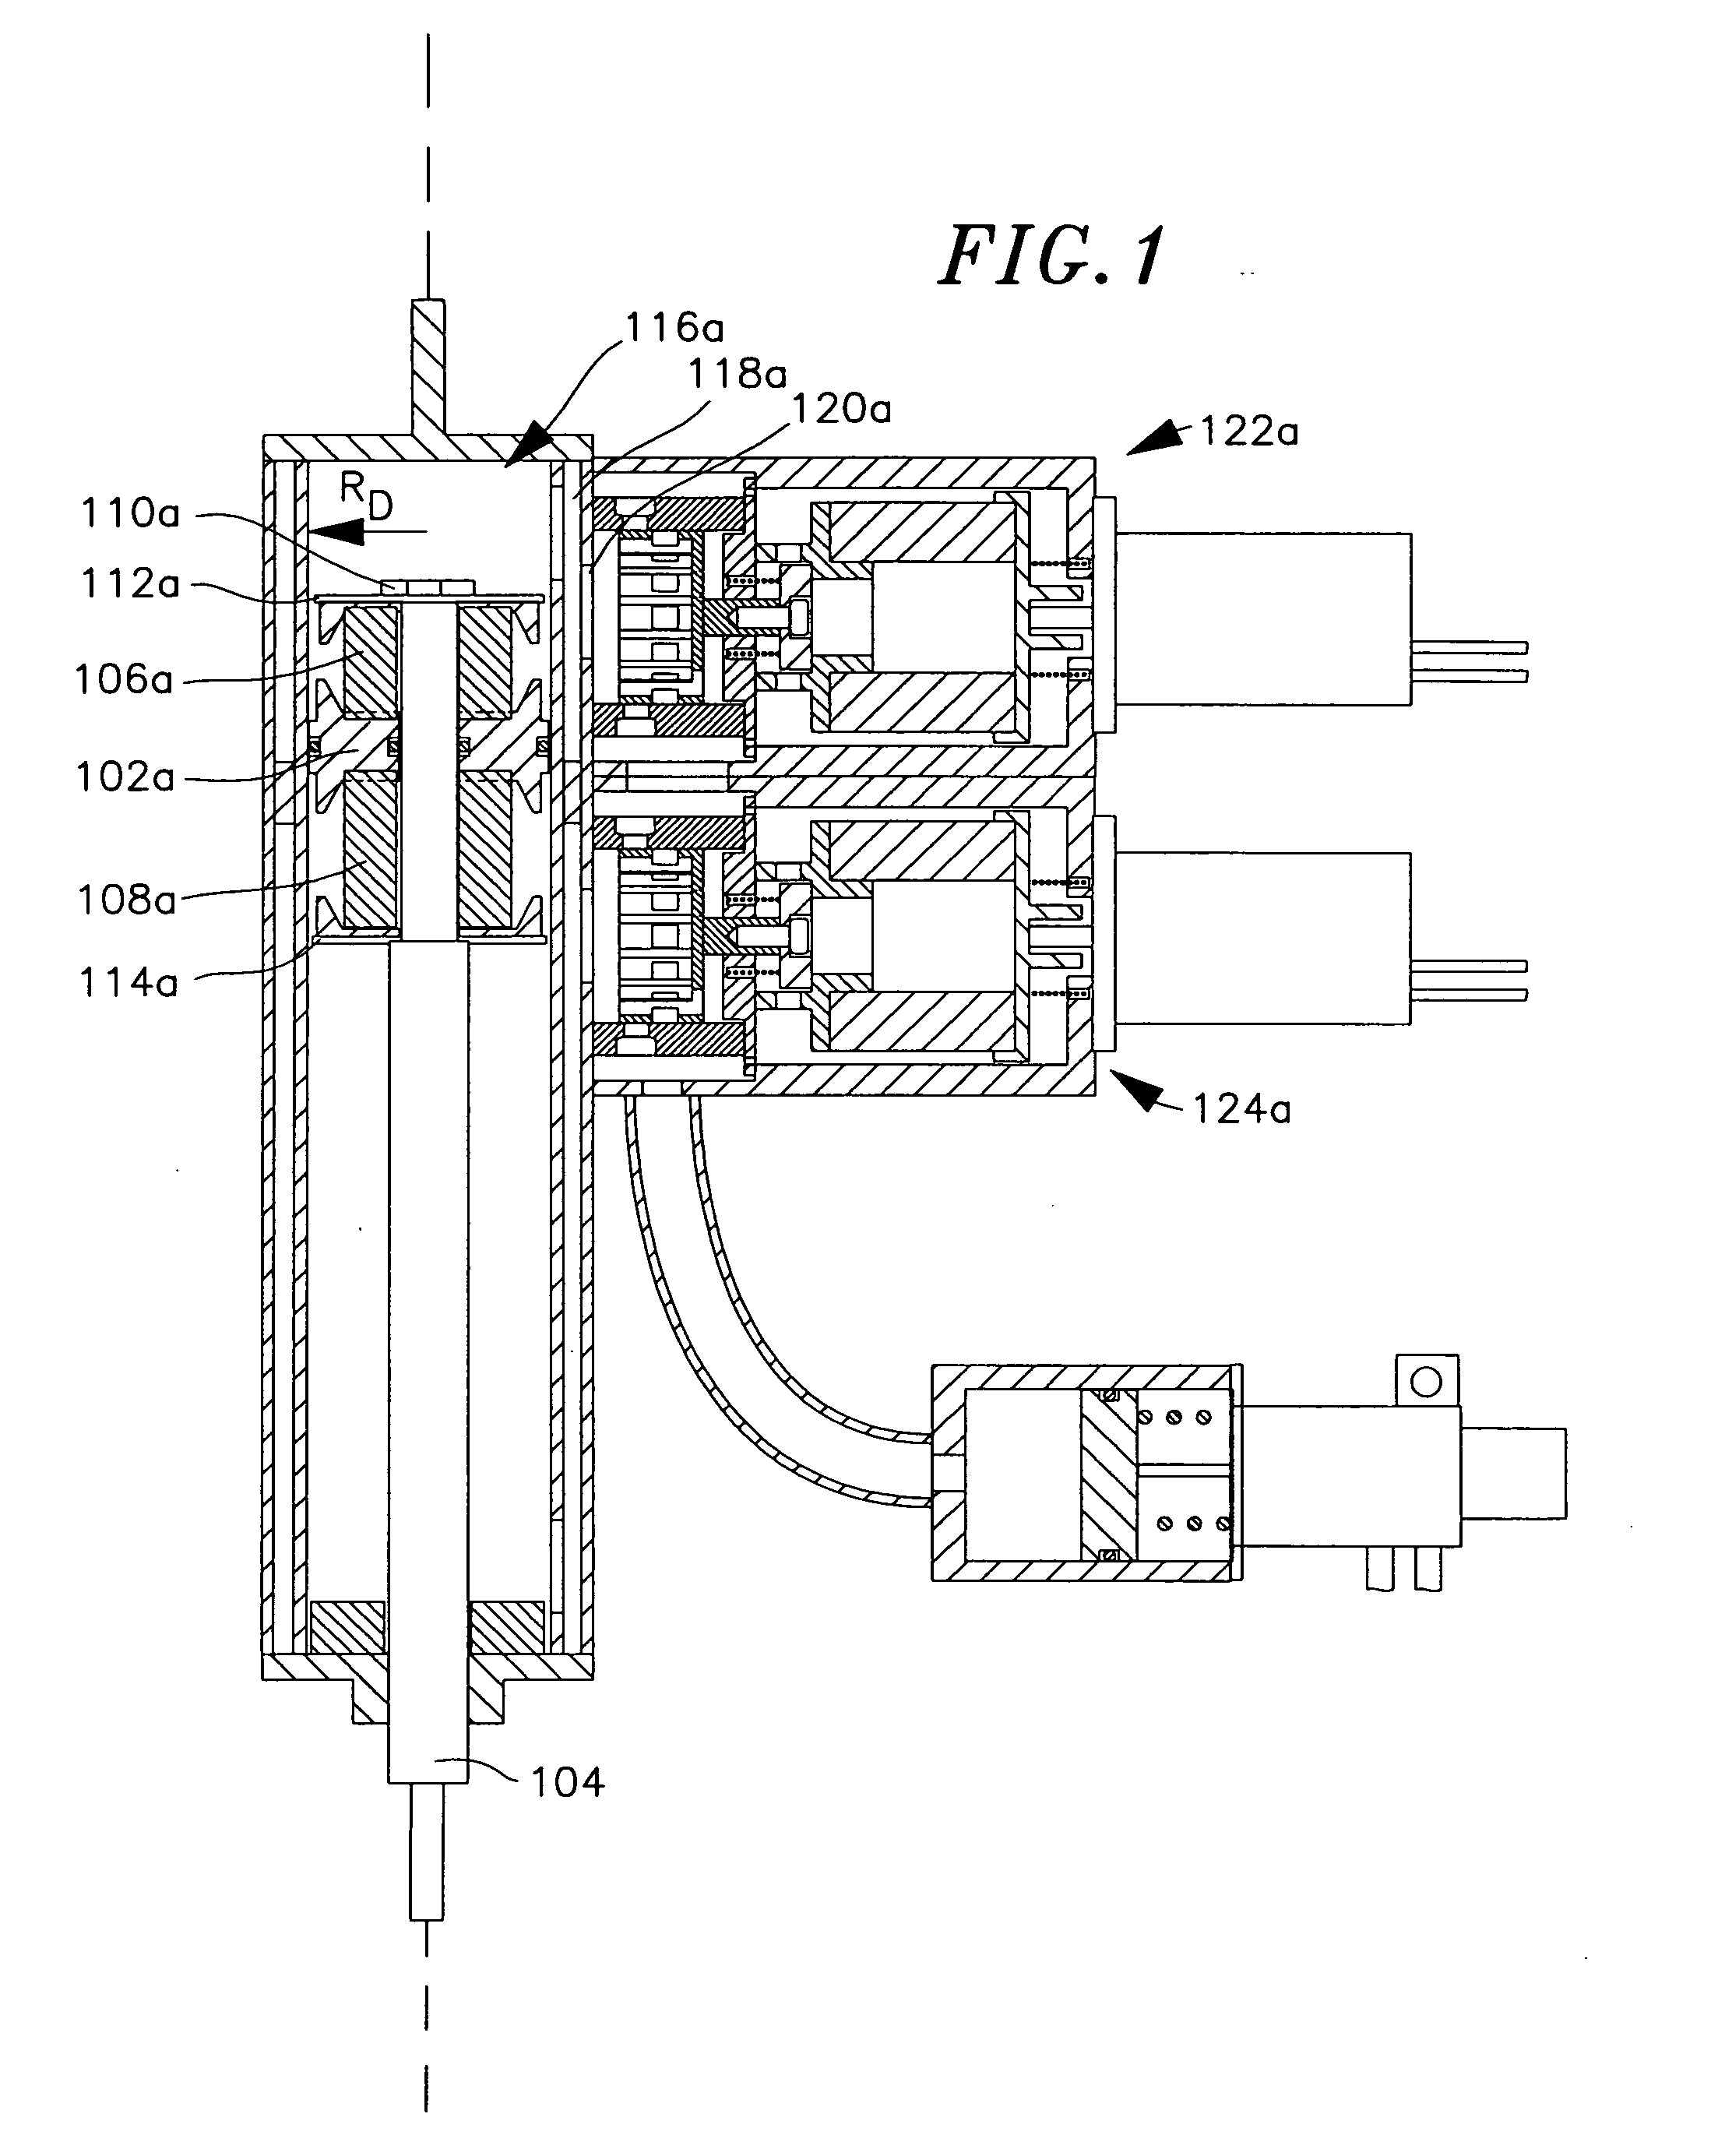 Enhanced computer optimized adaptive suspension system and method